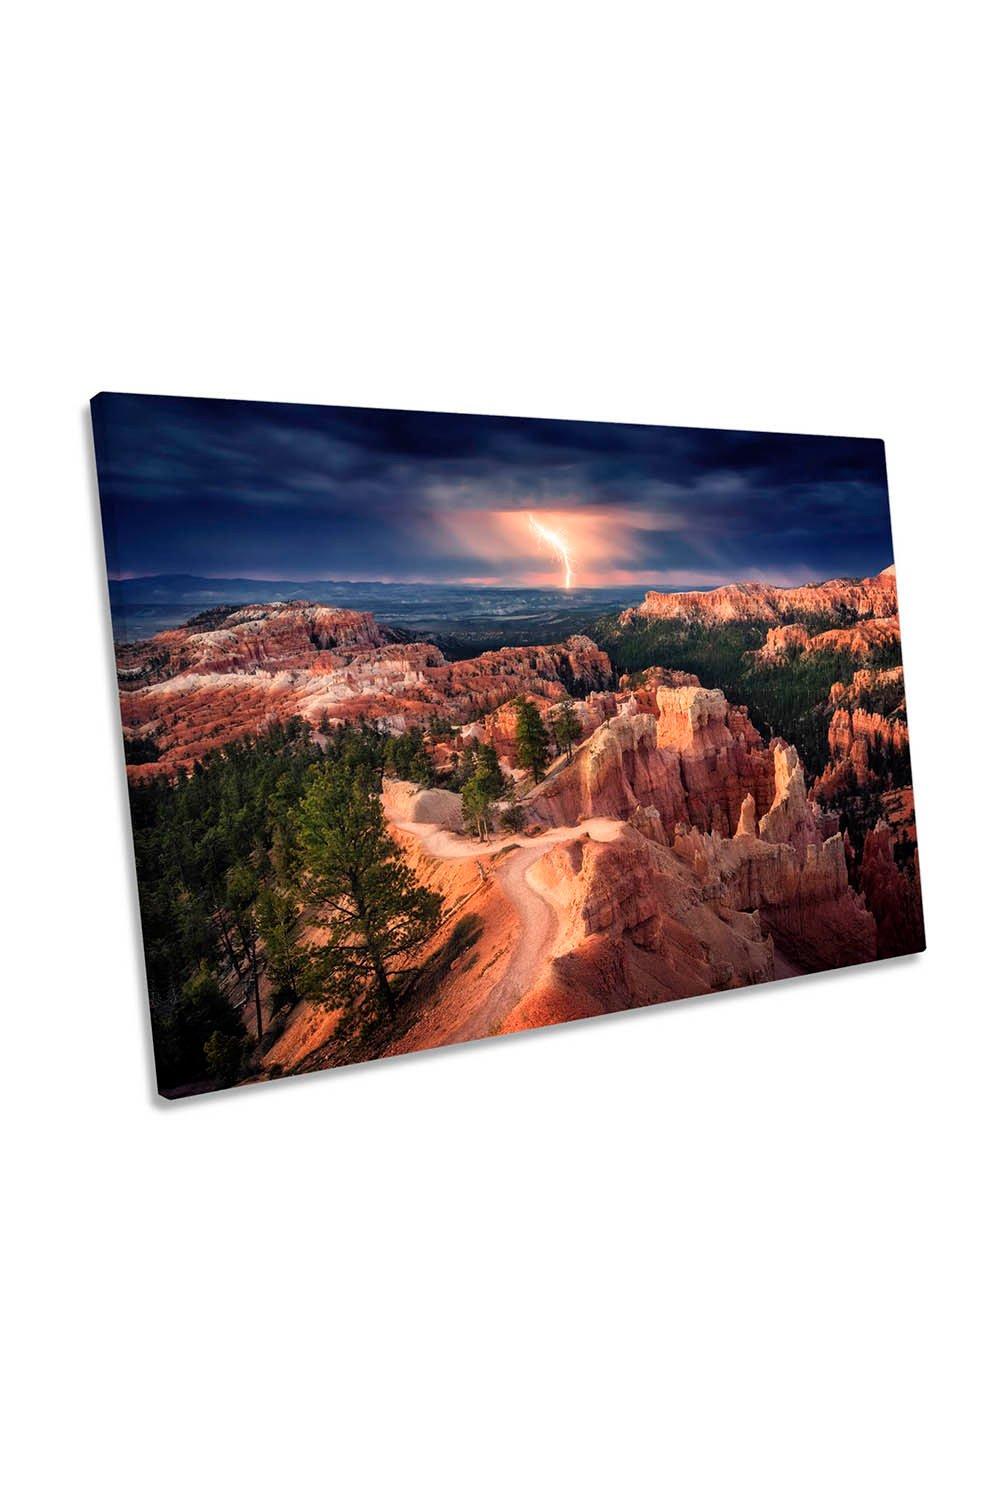 Lightning Bryce Canyon Landscape Canvas Wall Art Picture Print